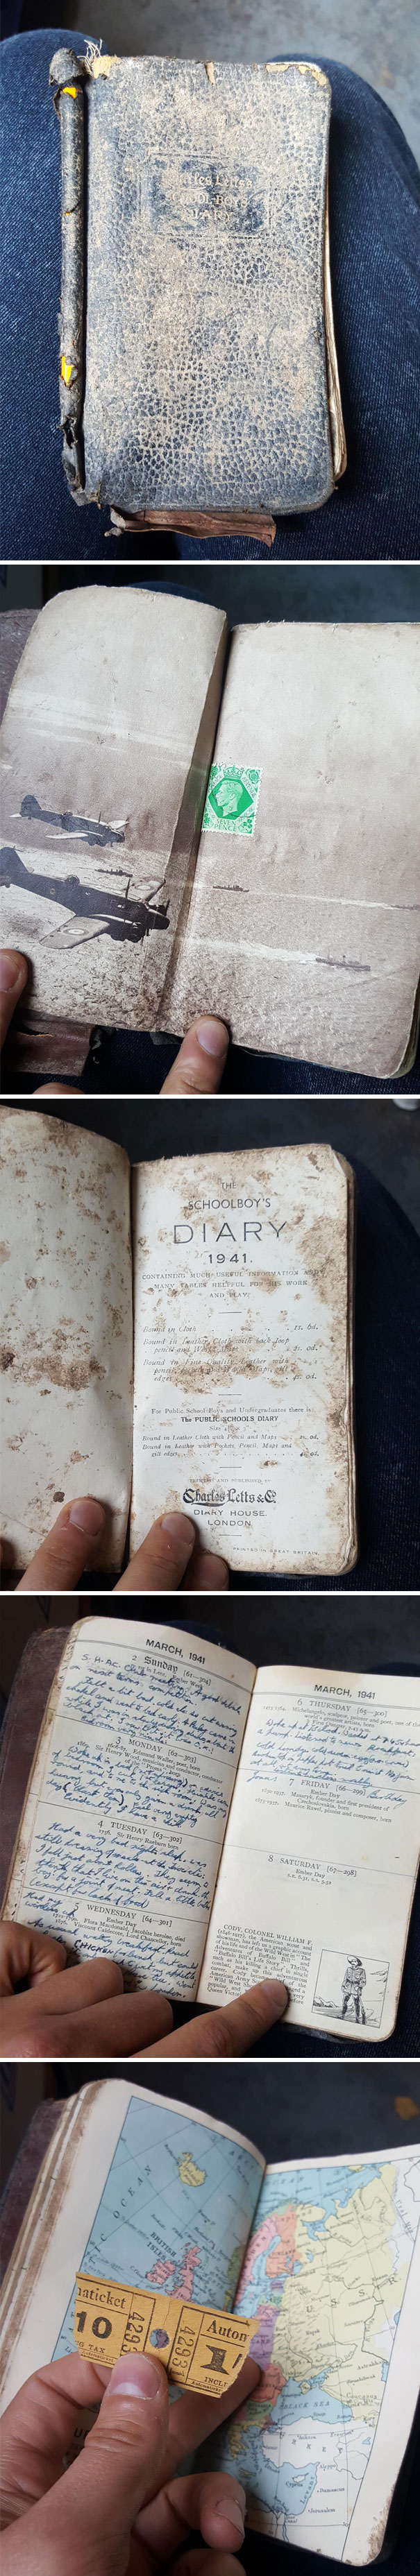 My Friend Works In Recycling. He Found A Filled Diary From 1941